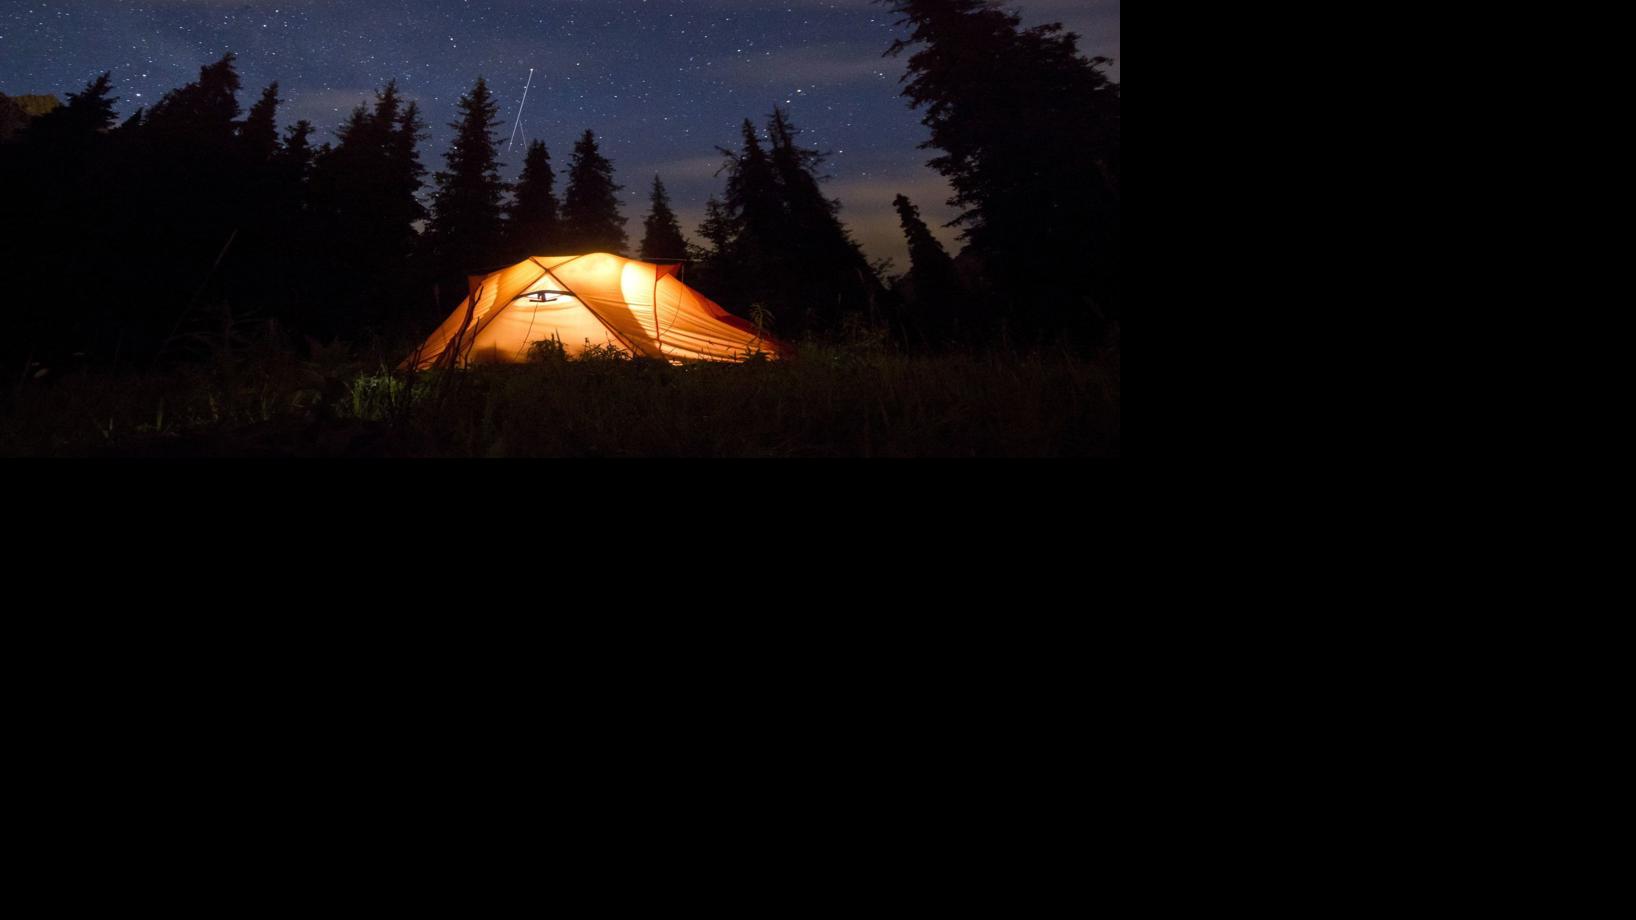 Pitch a tent, and play outdoors at these 5 Midwest campgrounds | Travel